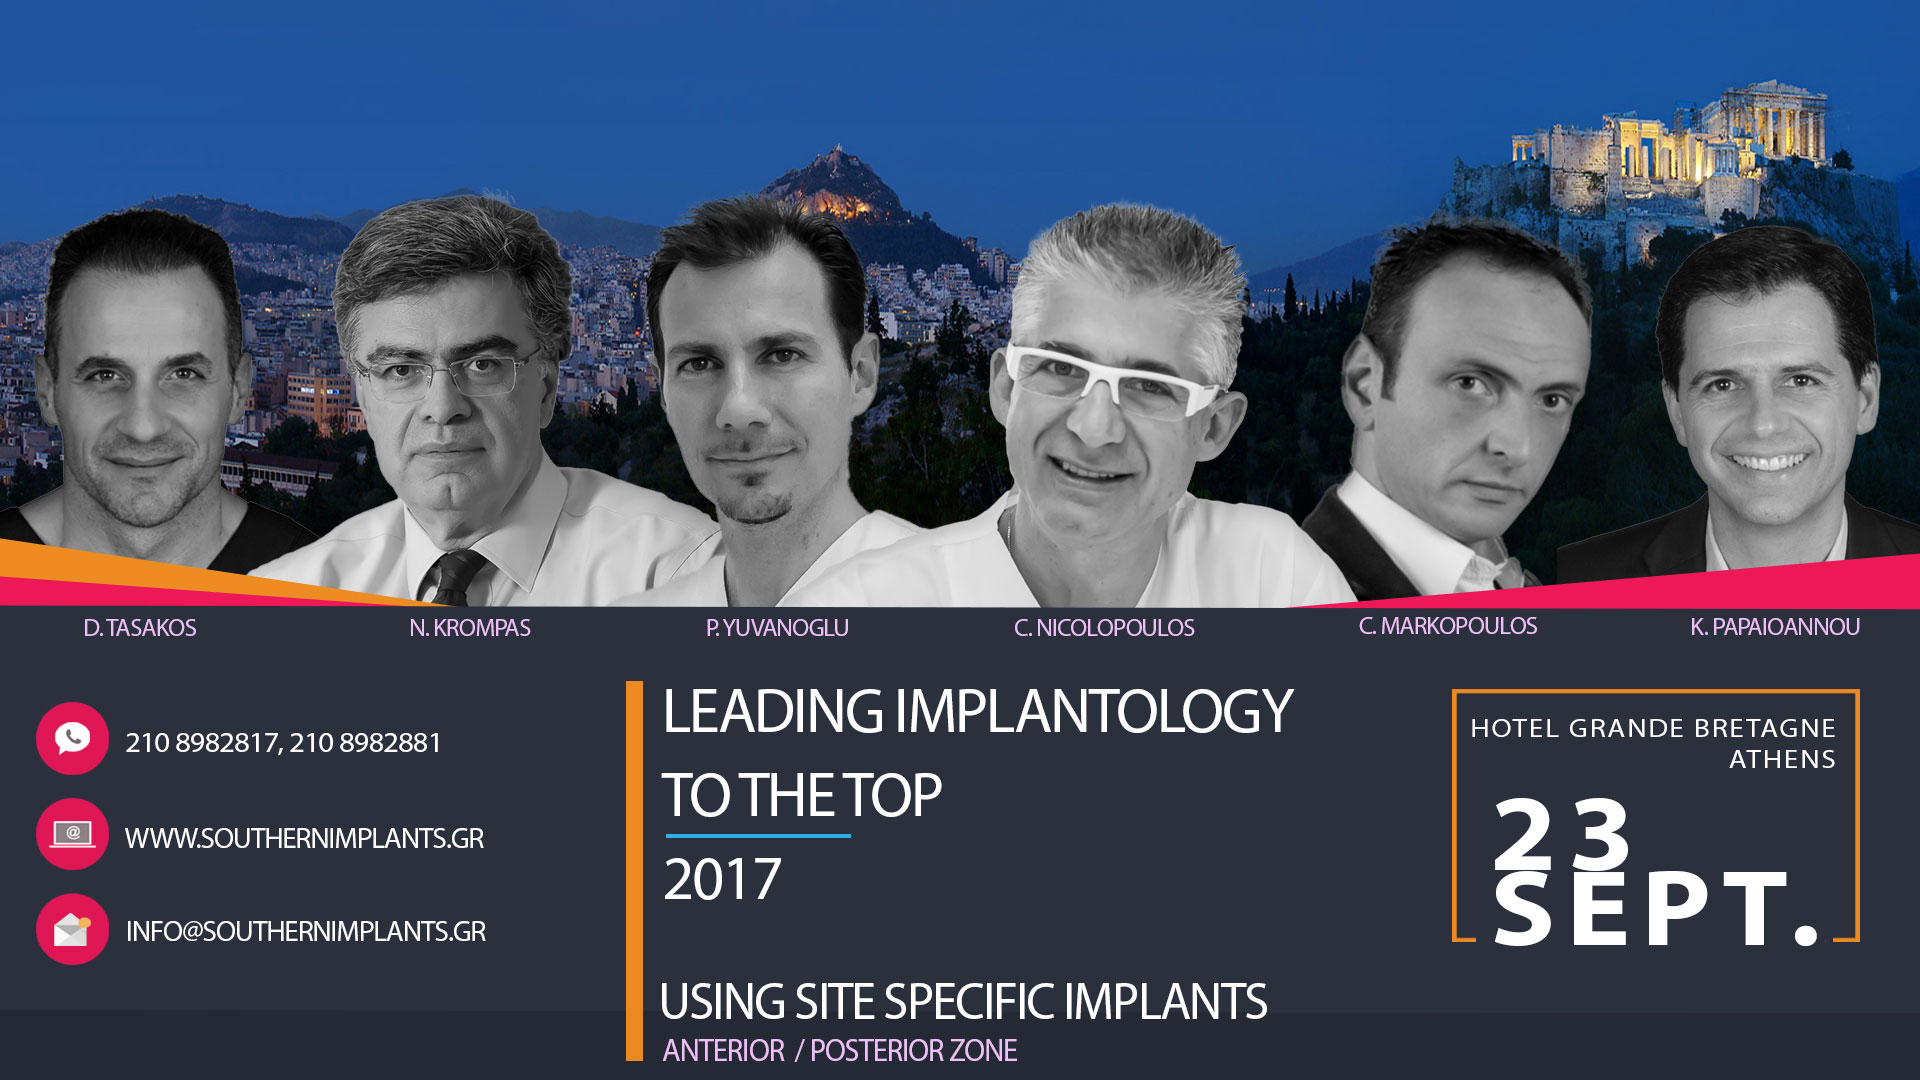 Leading Implantology to the Top '17 "Using site specific Implants